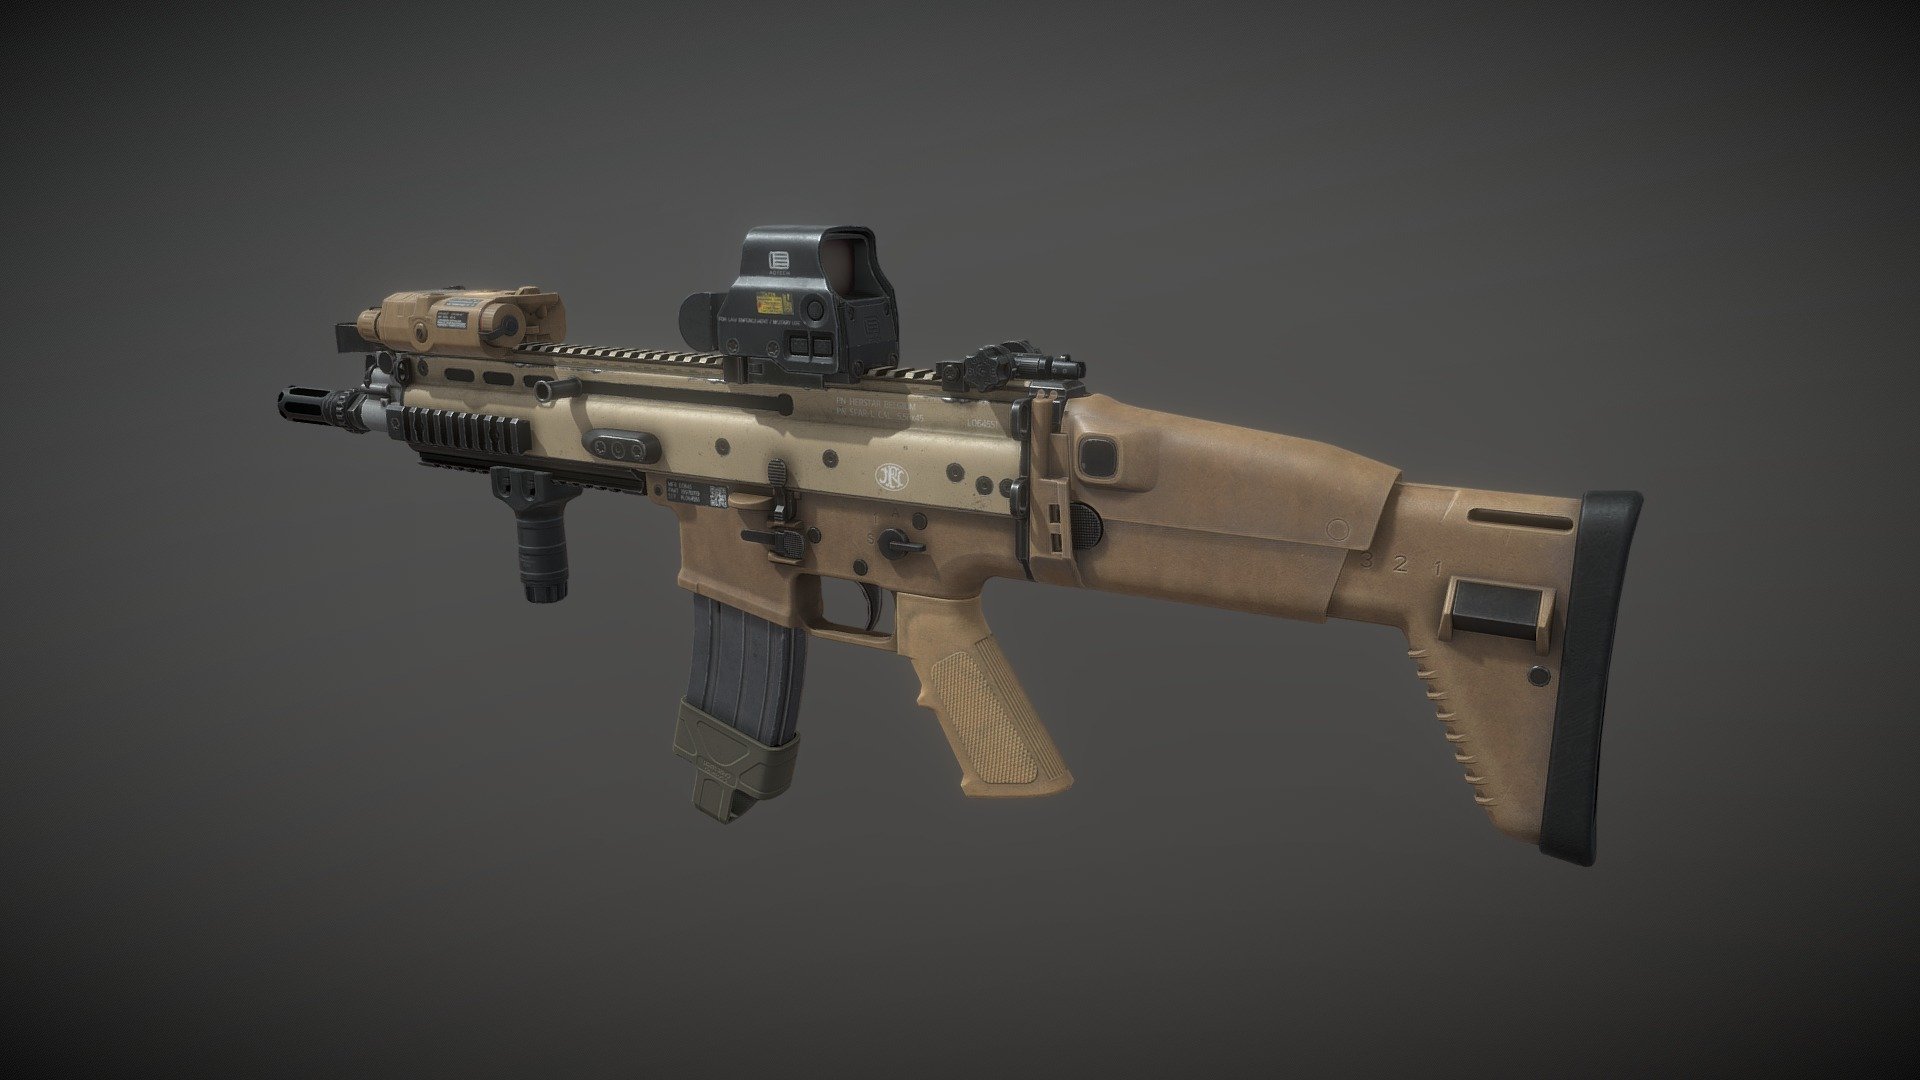 Scar-L Assault Rifle lowpoly modeling.
This modeling is optimized for PBR 3d model